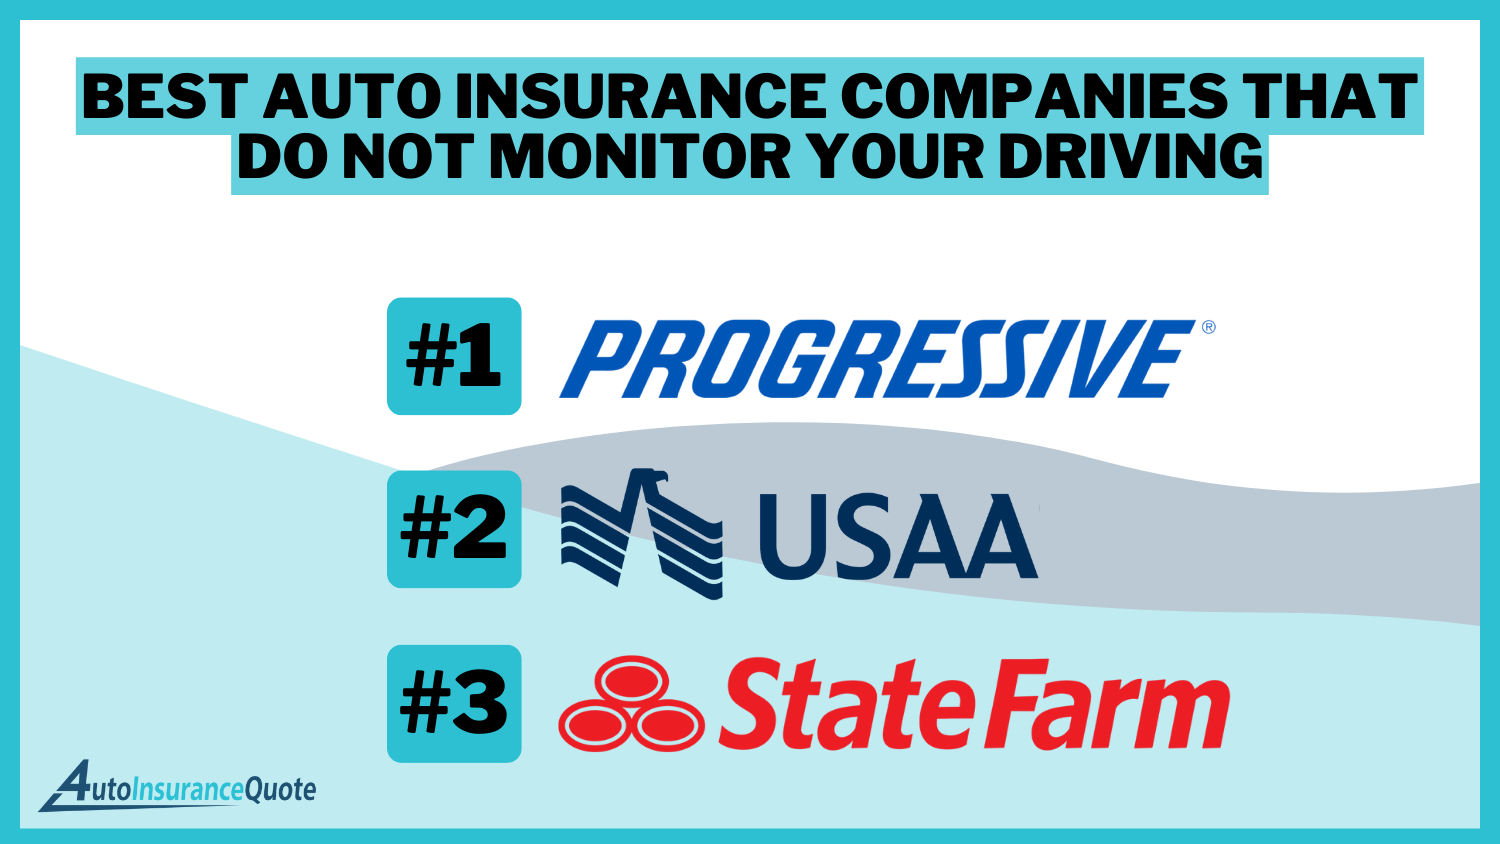 Best Auto Insurance Companies That Do Not Monitor Your Driving